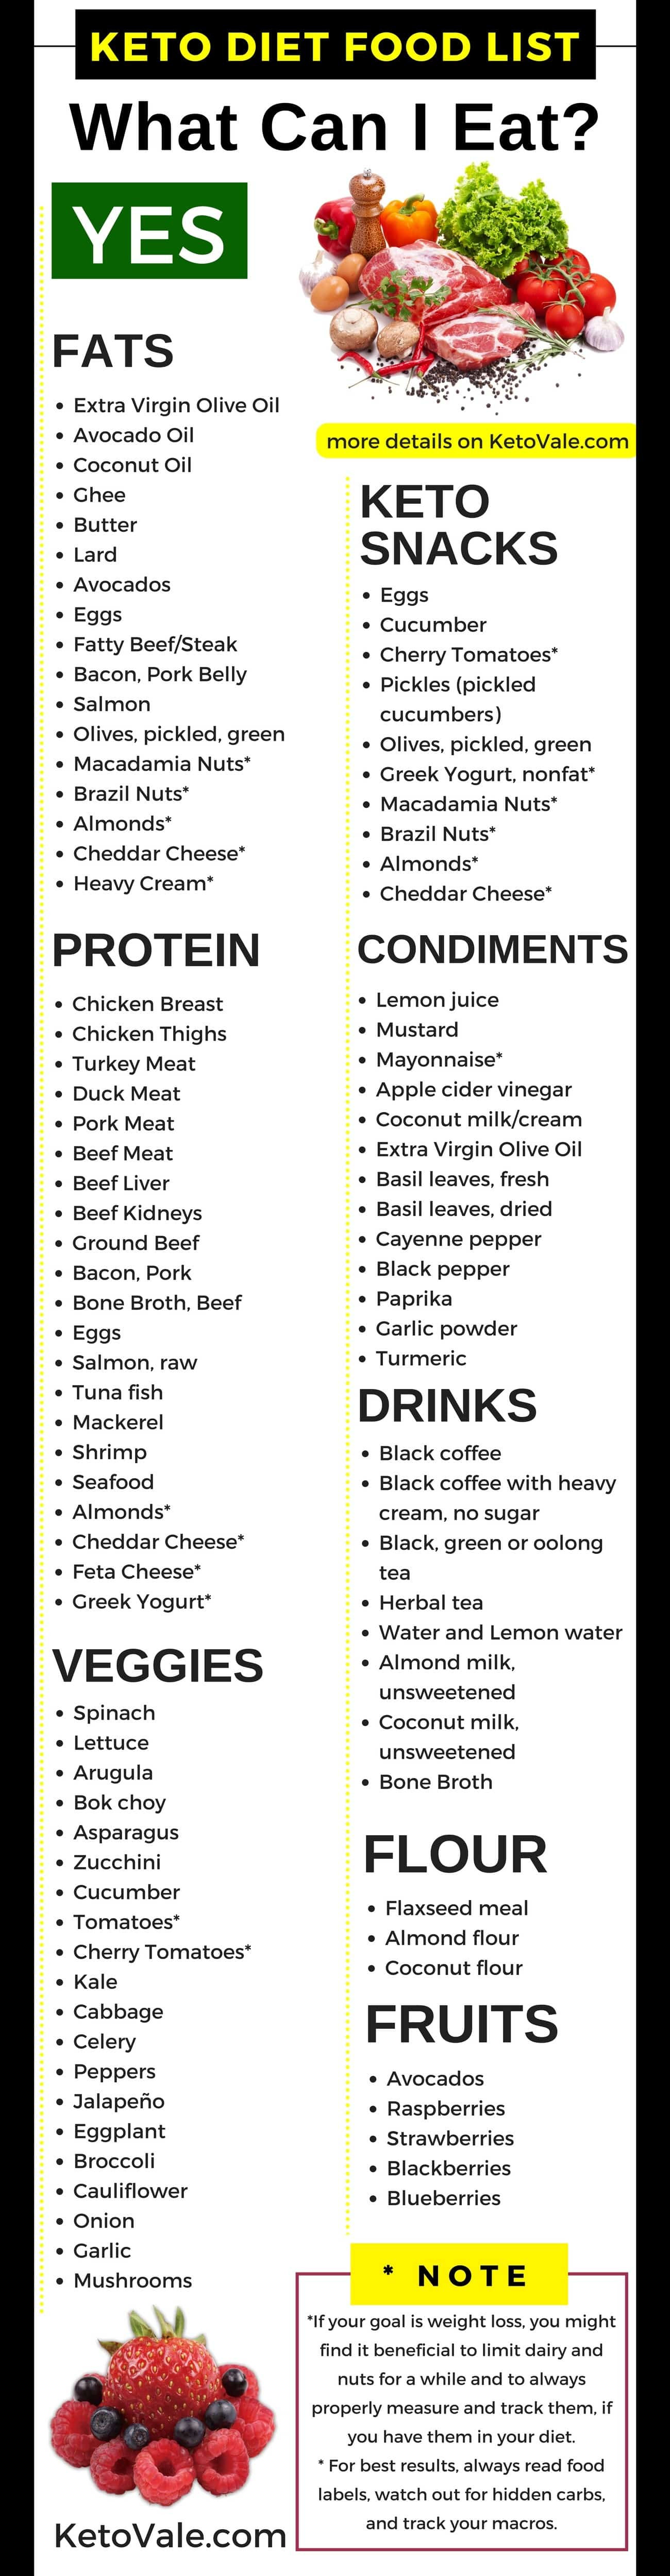 Guide To Keto Diet
 Keto Diet Food List Low Carb Grocery Shopping Guide PDF